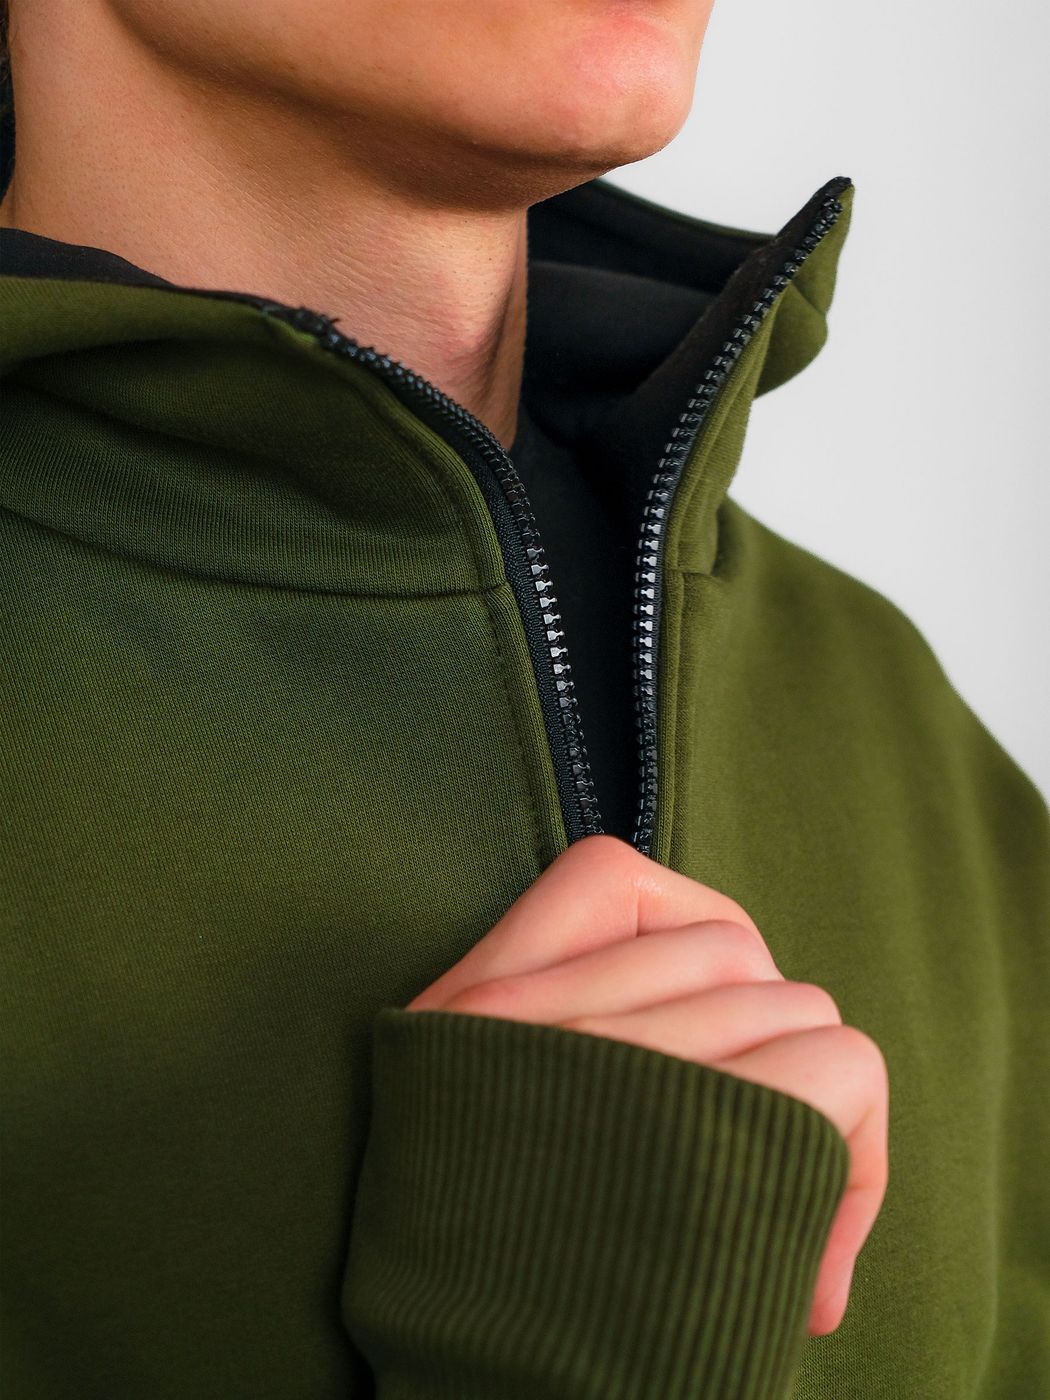 Men's tracksuit set Hoodie with a zipper and Pants Green, Green, M-L, L (108 cm)